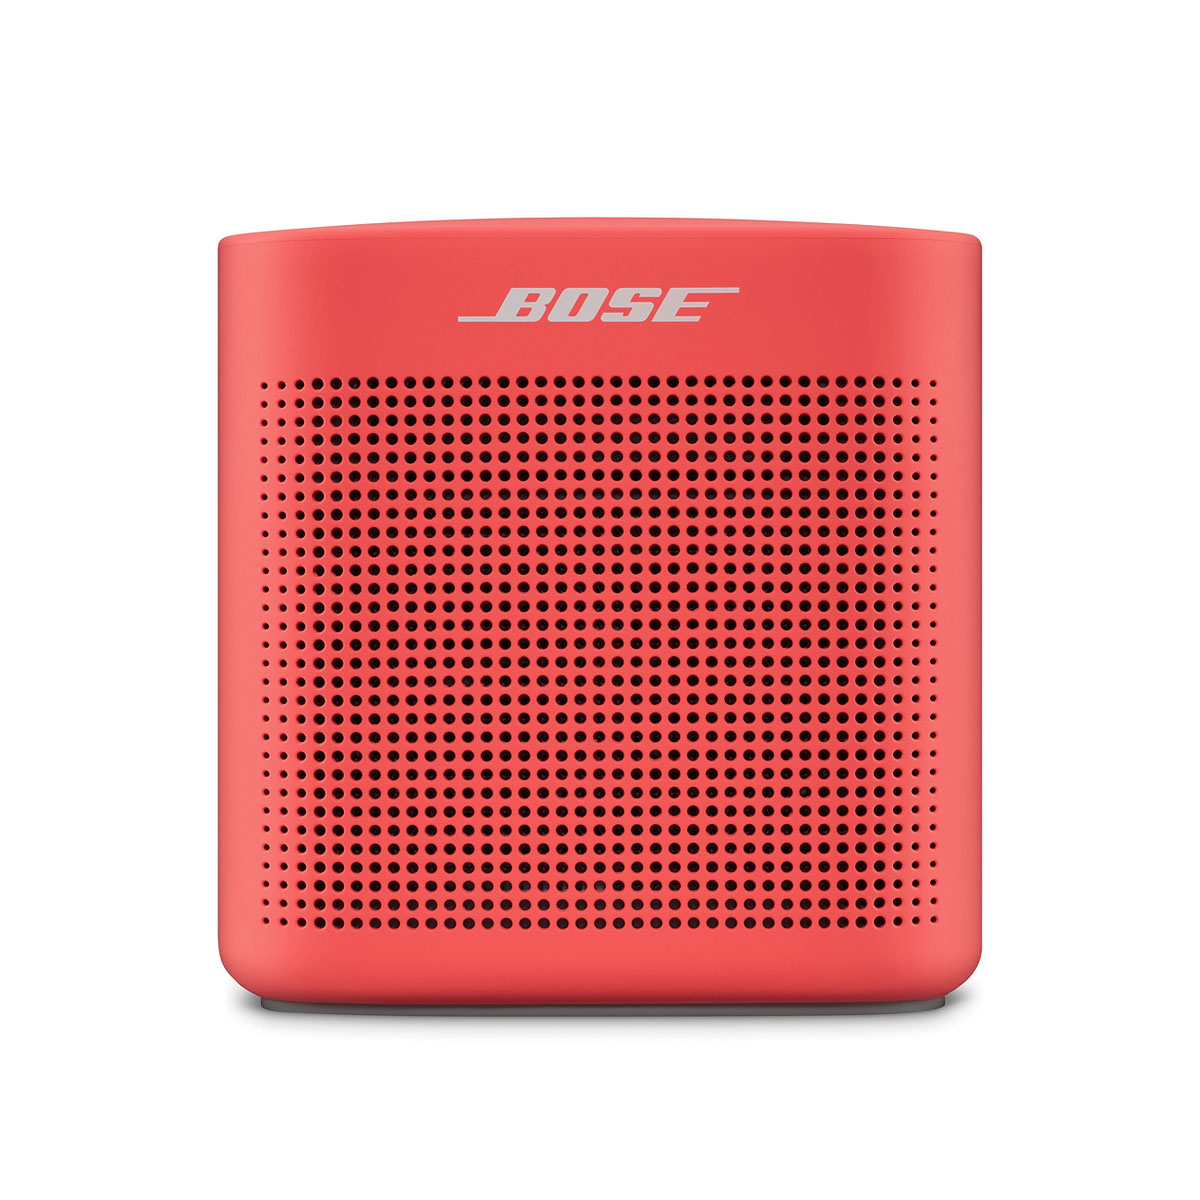 Bose - SoundLink Colour II - Coral Red